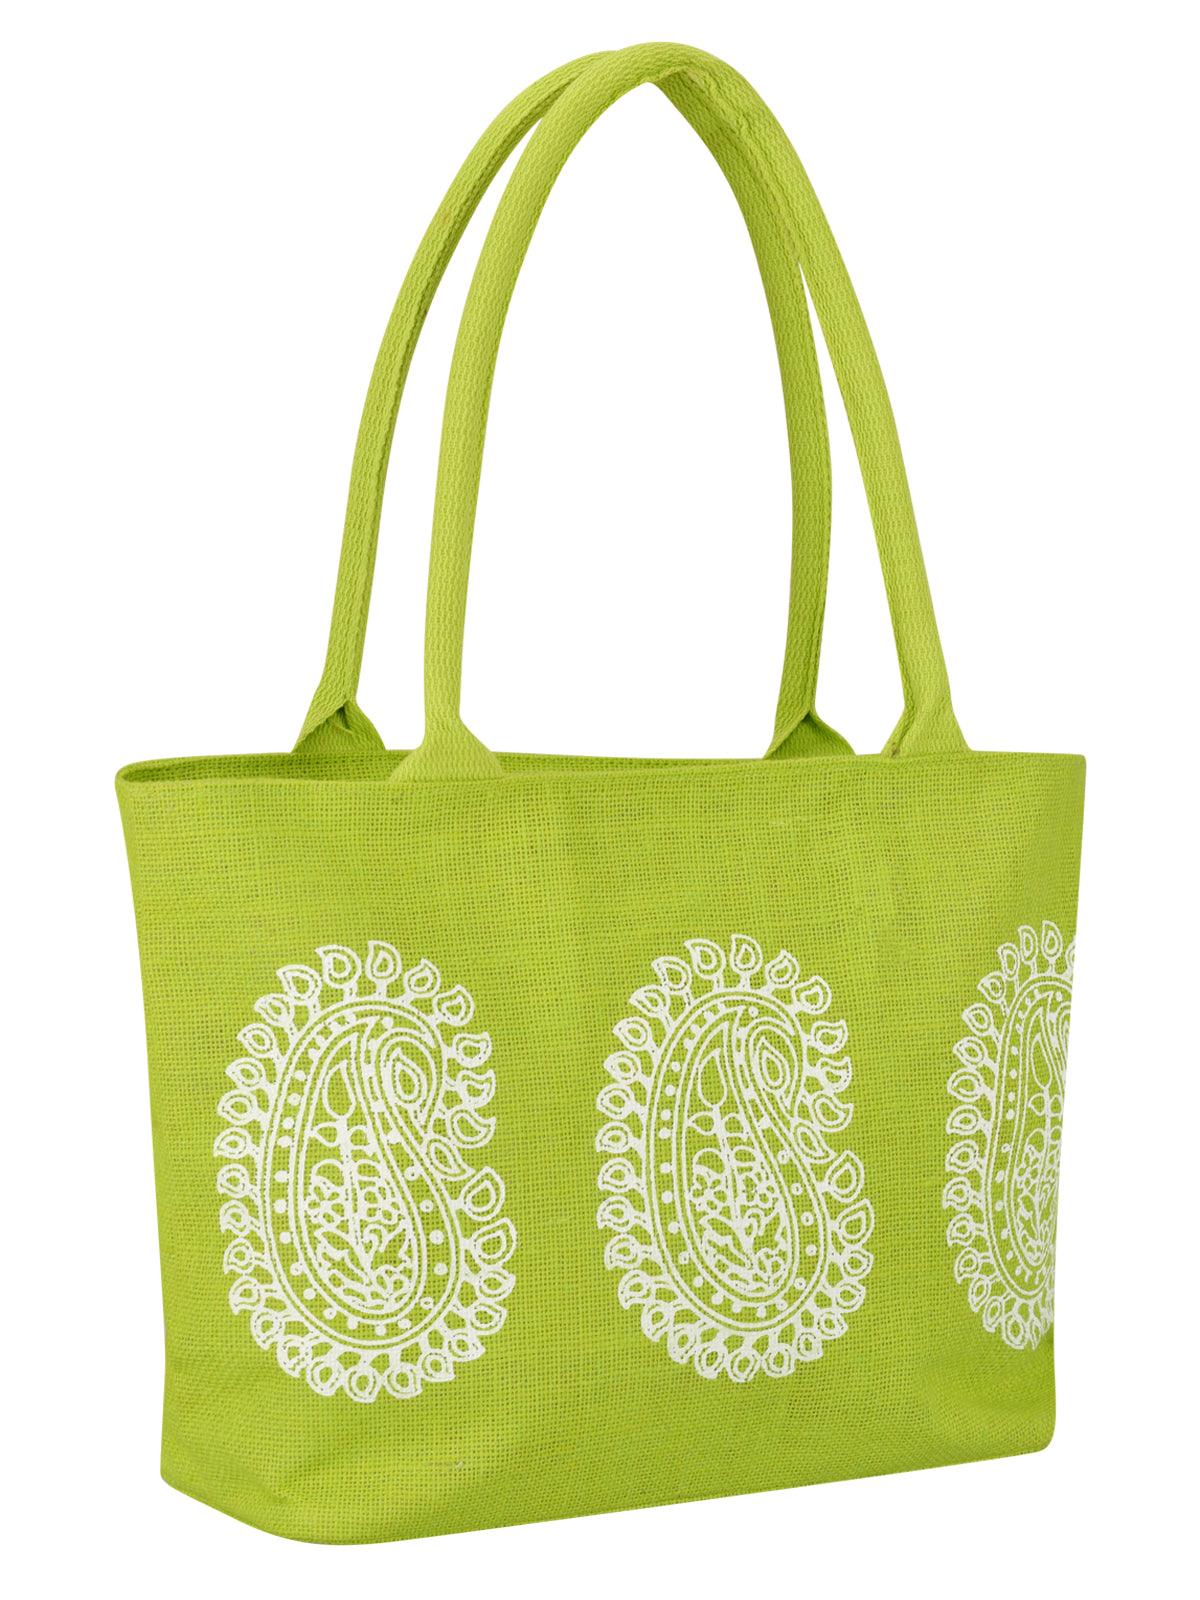 Low Budget Cotton bags Manufacturer, Exporter, Supplier in India